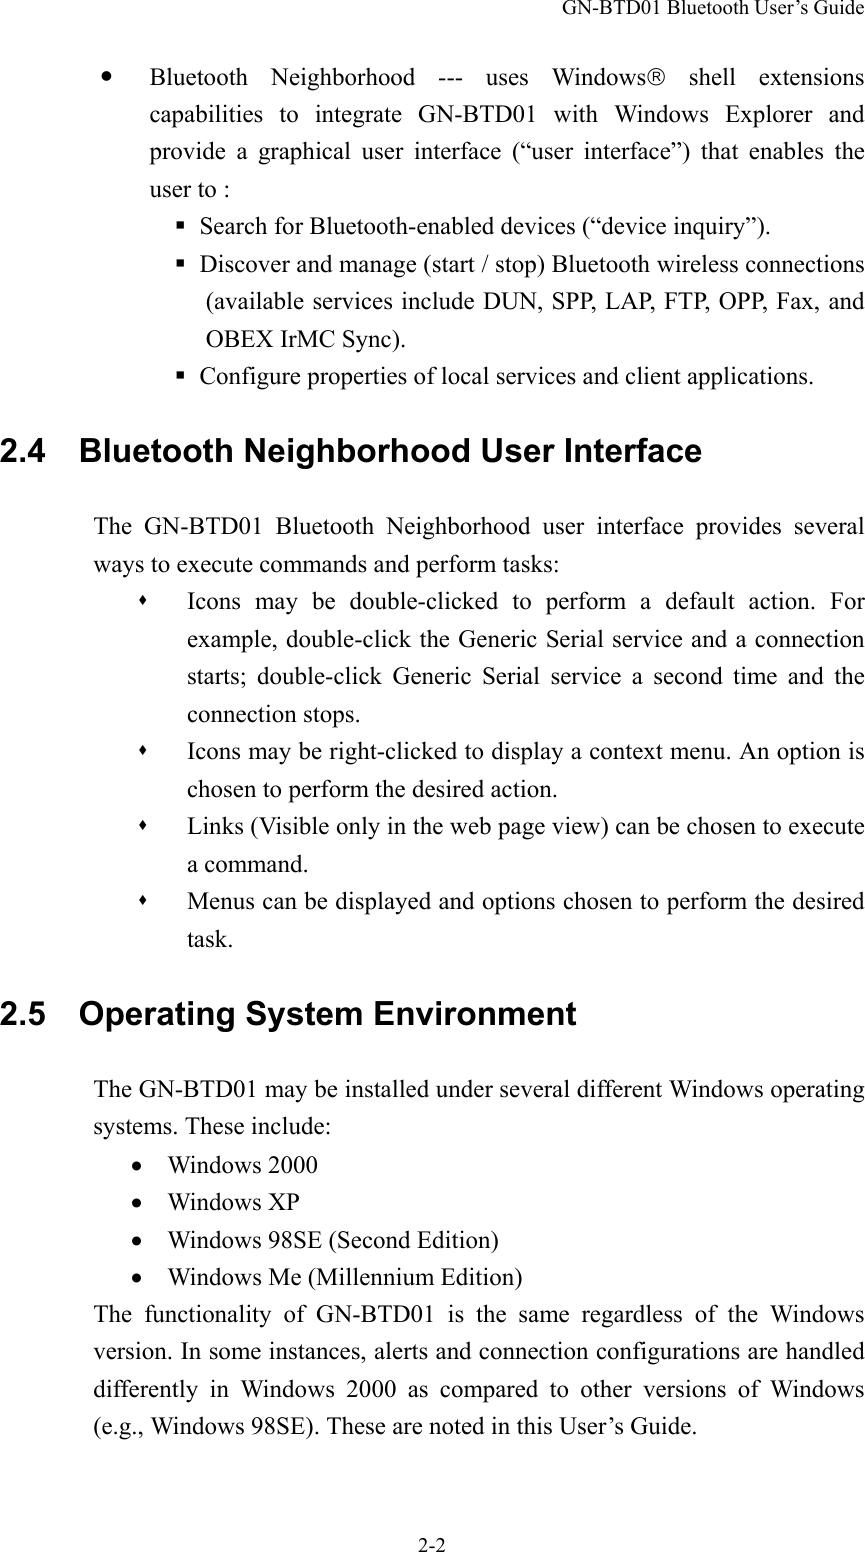 GN-BTD01 Bluetooth User’s Guide 2-2   Bluetooth Neighborhood --- uses Windows shell extensions capabilities to integrate GN-BTD01 with Windows Explorer and provide a graphical user interface (“user interface”) that enables the user to :  Search for Bluetooth-enabled devices (“device inquiry”).  Discover and manage (start / stop) Bluetooth wireless connections (available services include DUN, SPP, LAP, FTP, OPP, Fax, and OBEX IrMC Sync).  Configure properties of local services and client applications. 2.4    Bluetooth Neighborhood User Interface The GN-BTD01 Bluetooth Neighborhood user interface provides several ways to execute commands and perform tasks:   Icons may be double-clicked to perform a default action. For example, double-click the Generic Serial service and a connection starts; double-click Generic Serial service a second time and the connection stops.   Icons may be right-clicked to display a context menu. An option is chosen to perform the desired action.   Links (Visible only in the web page view) can be chosen to execute a command.   Menus can be displayed and options chosen to perform the desired task. 2.5  Operating System Environment The GN-BTD01 may be installed under several different Windows operating systems. These include: •  Windows 2000 •  Windows XP •    Windows 98SE (Second Edition) •    Windows Me (Millennium Edition) The functionality of GN-BTD01 is the same regardless of the Windows version. In some instances, alerts and connection configurations are handled differently in Windows 2000 as compared to other versions of Windows (e.g., Windows 98SE). These are noted in this User’s Guide. 